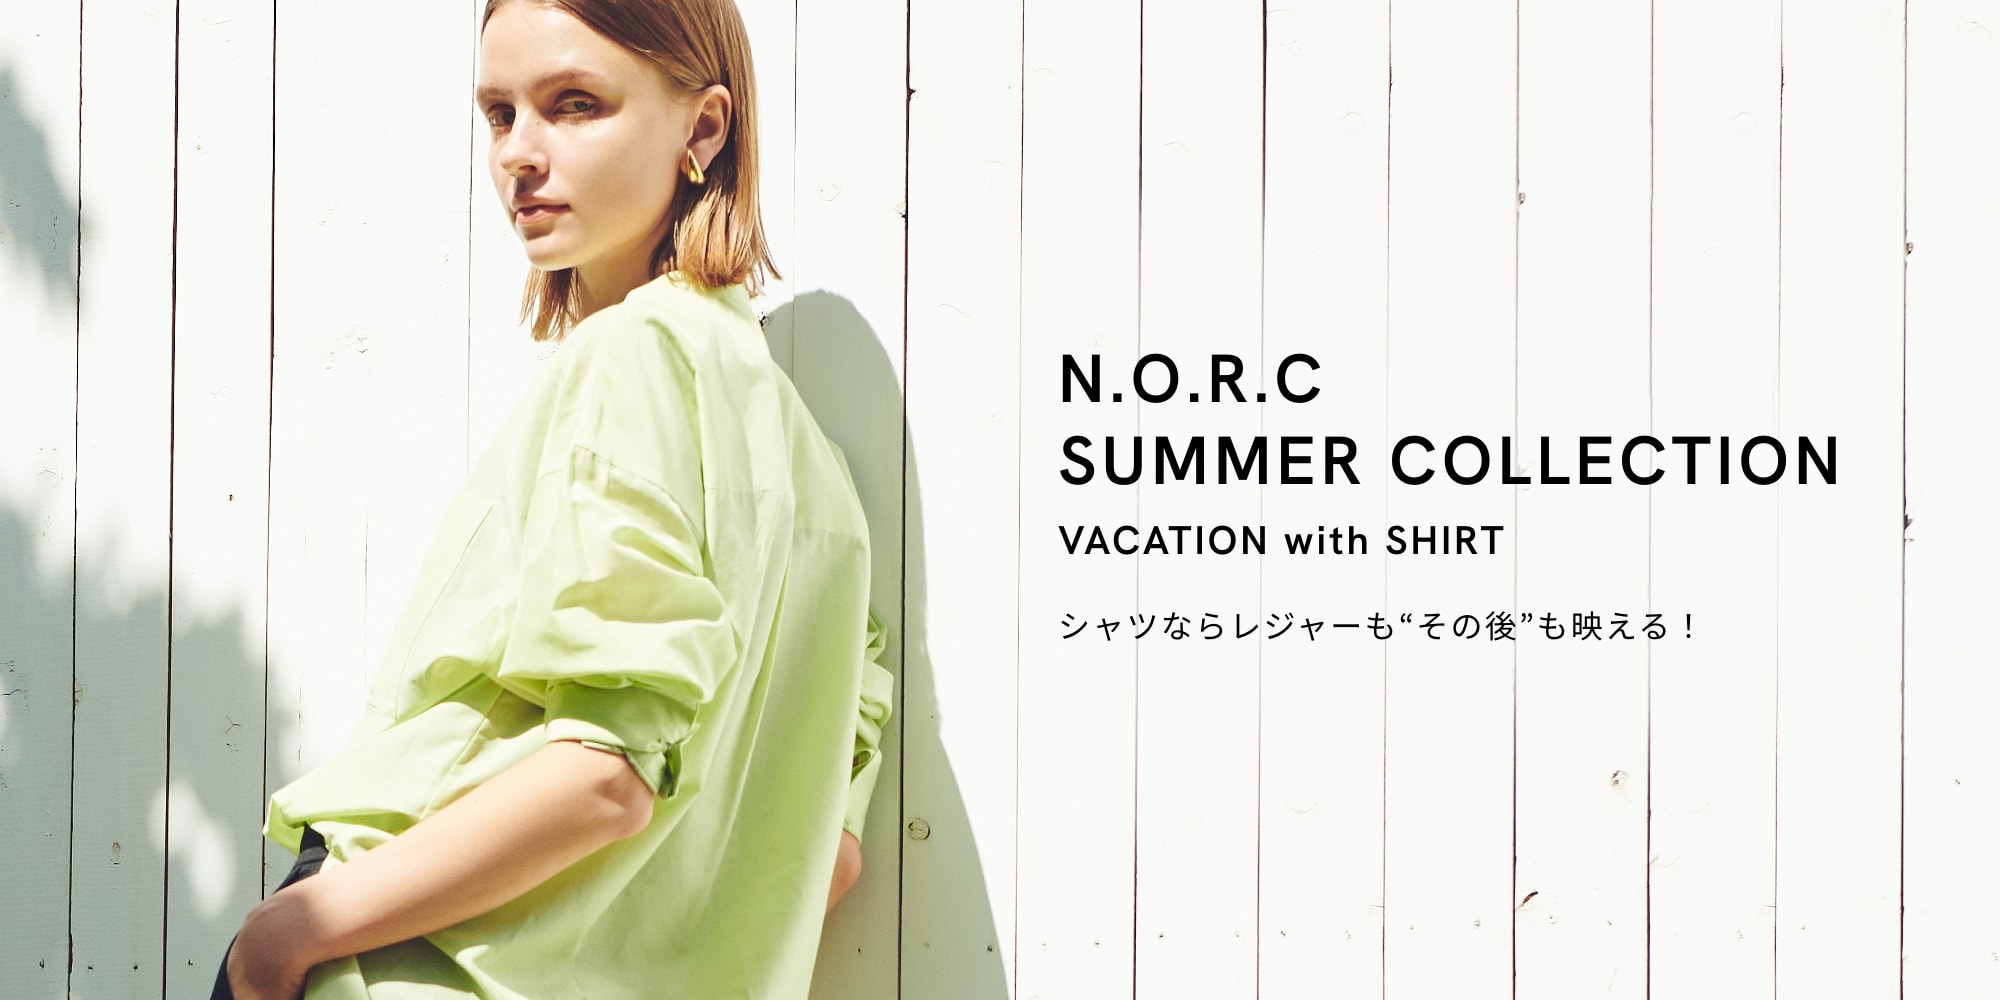 N.O.R.C SUMMER COLLECTION VACATION with SHIRT